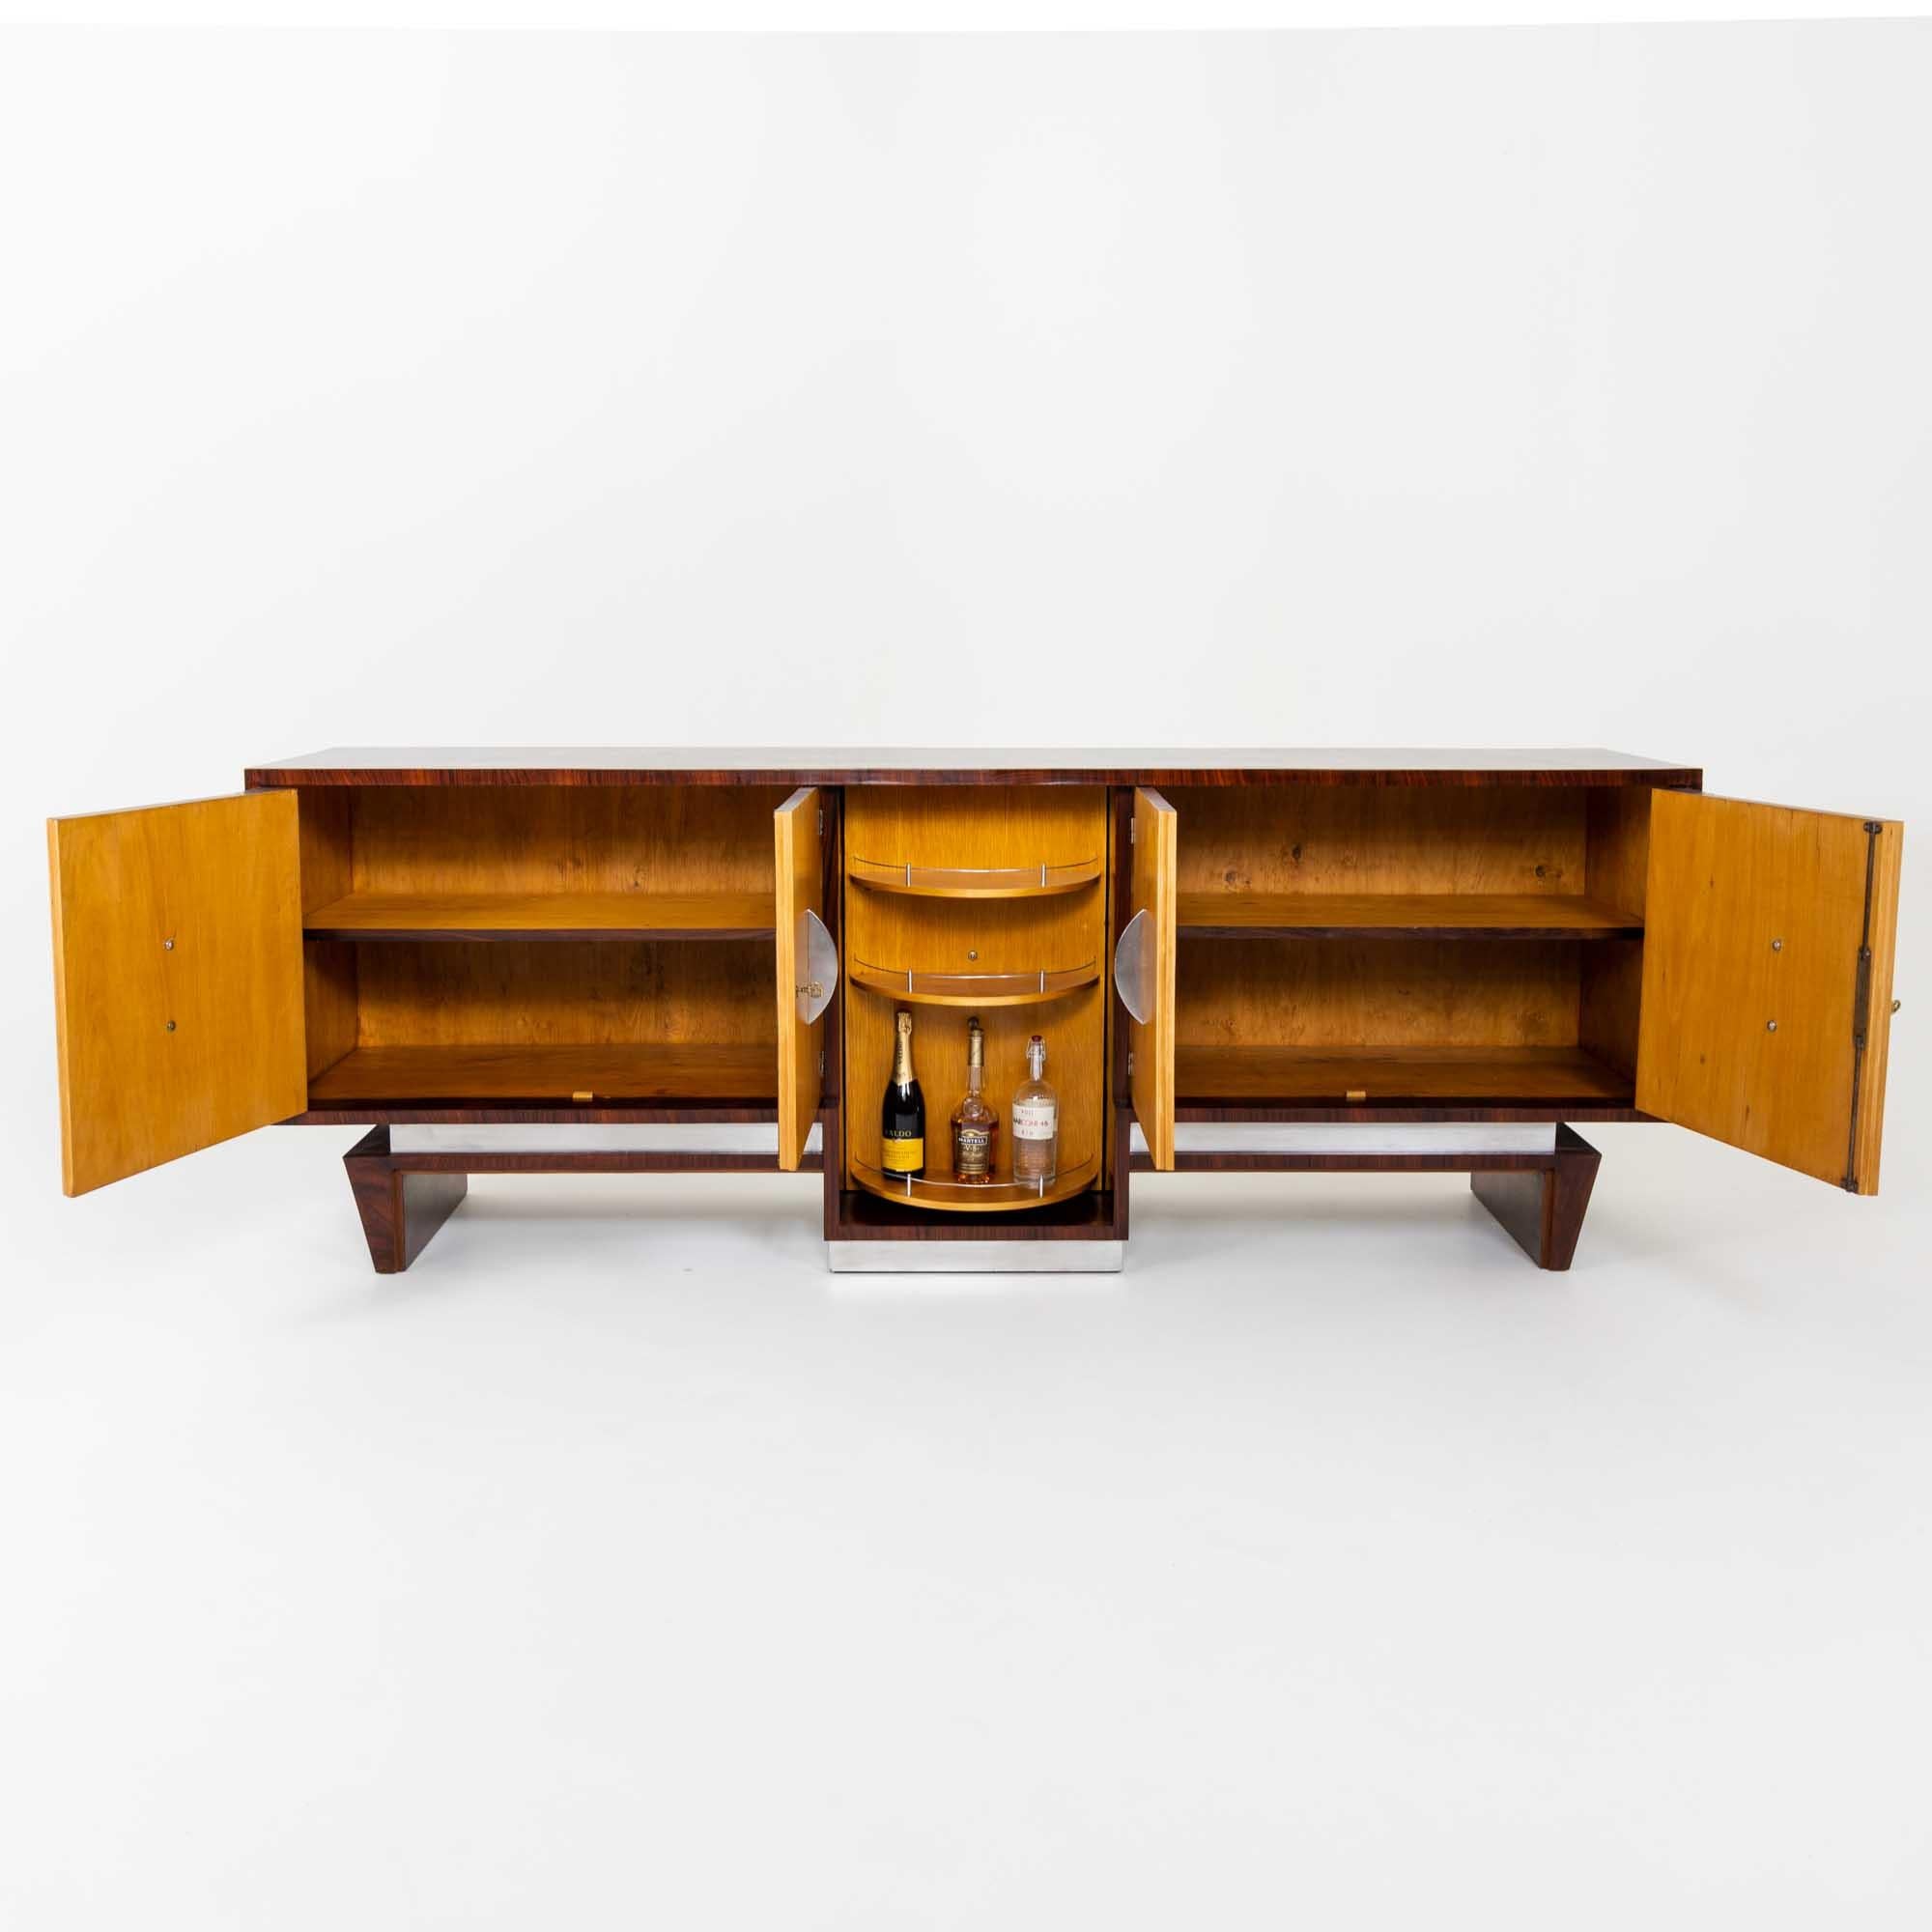 Sideboard with Bar Element by Franco Albini, Italy, 1930s For Sale 3